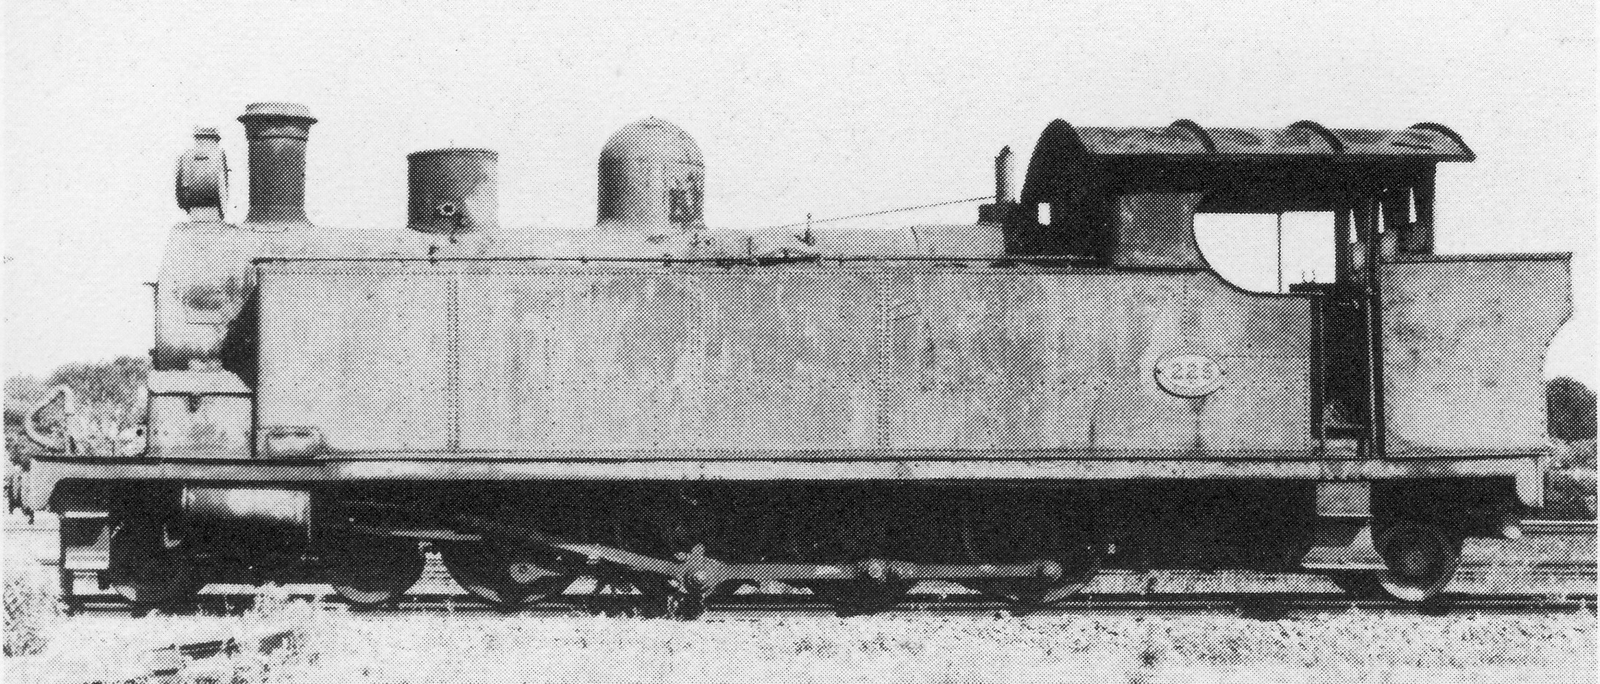 after the rebuild to 4-8-2T